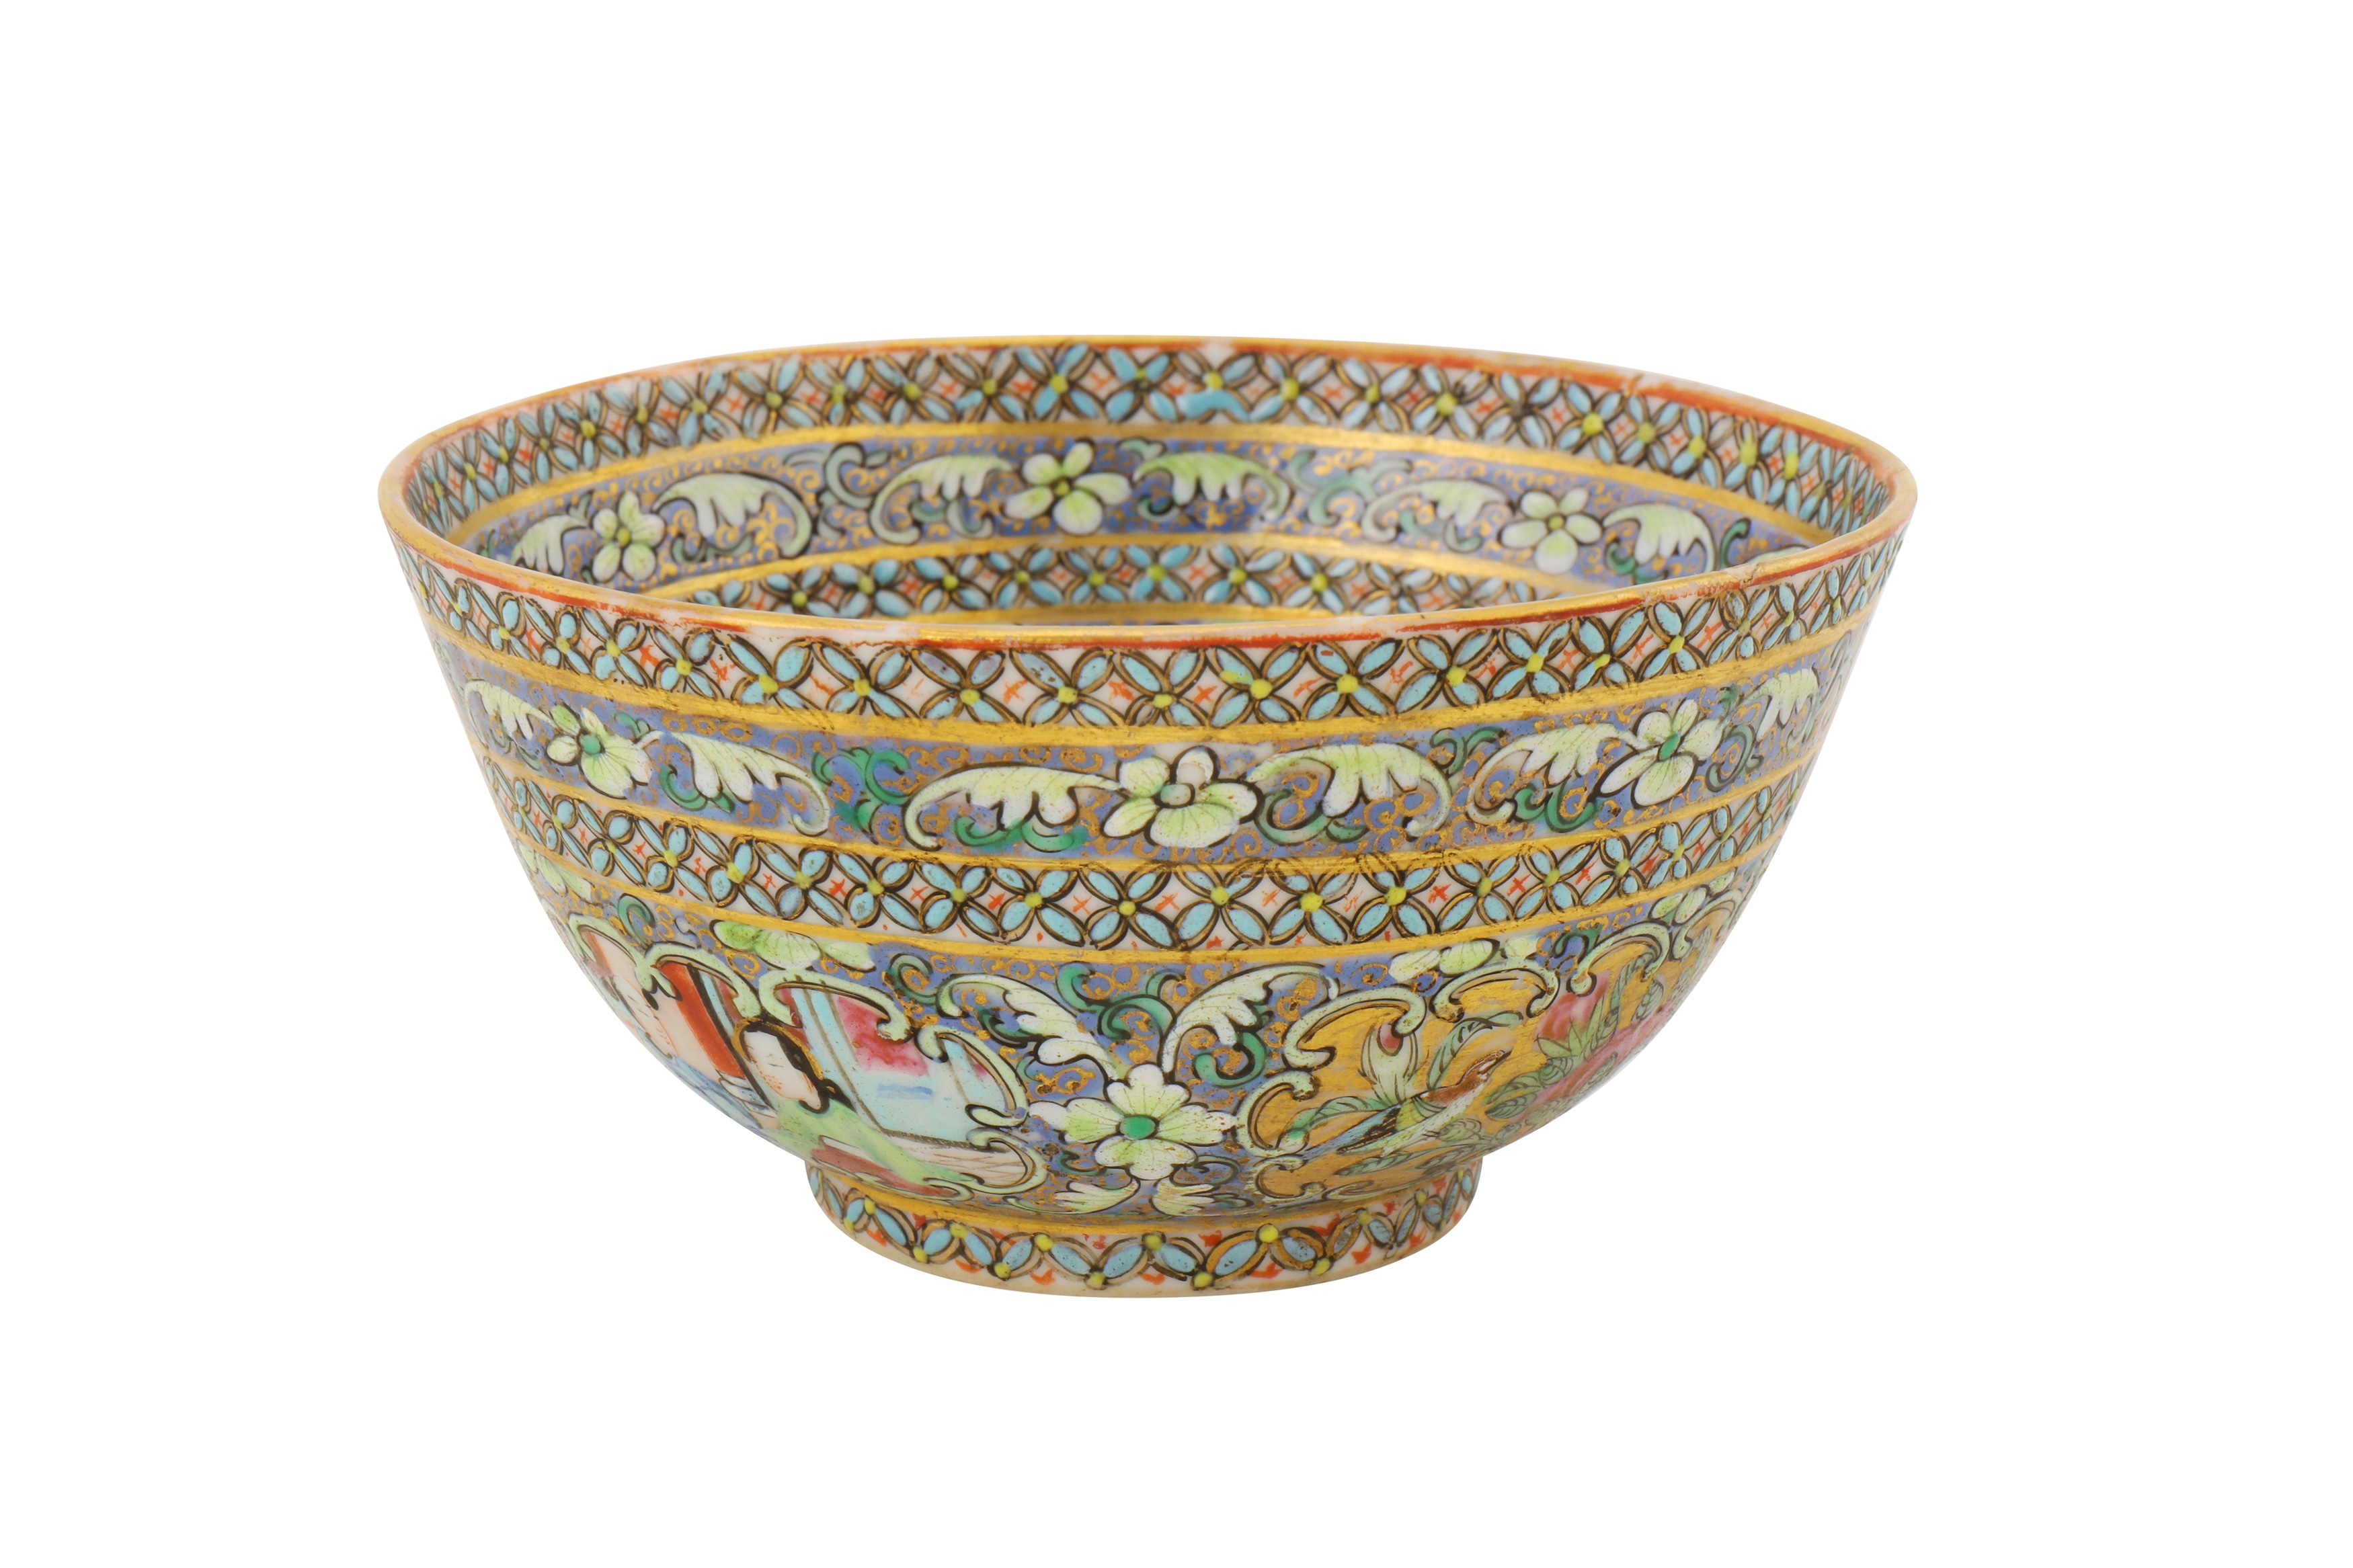 A MEDIUM-SIZED BOWL AND DISH AND SMALLER BOWL FROM THE ZILL AL-SULTAN CANTON PORCELAIN SERVICE - Image 4 of 17